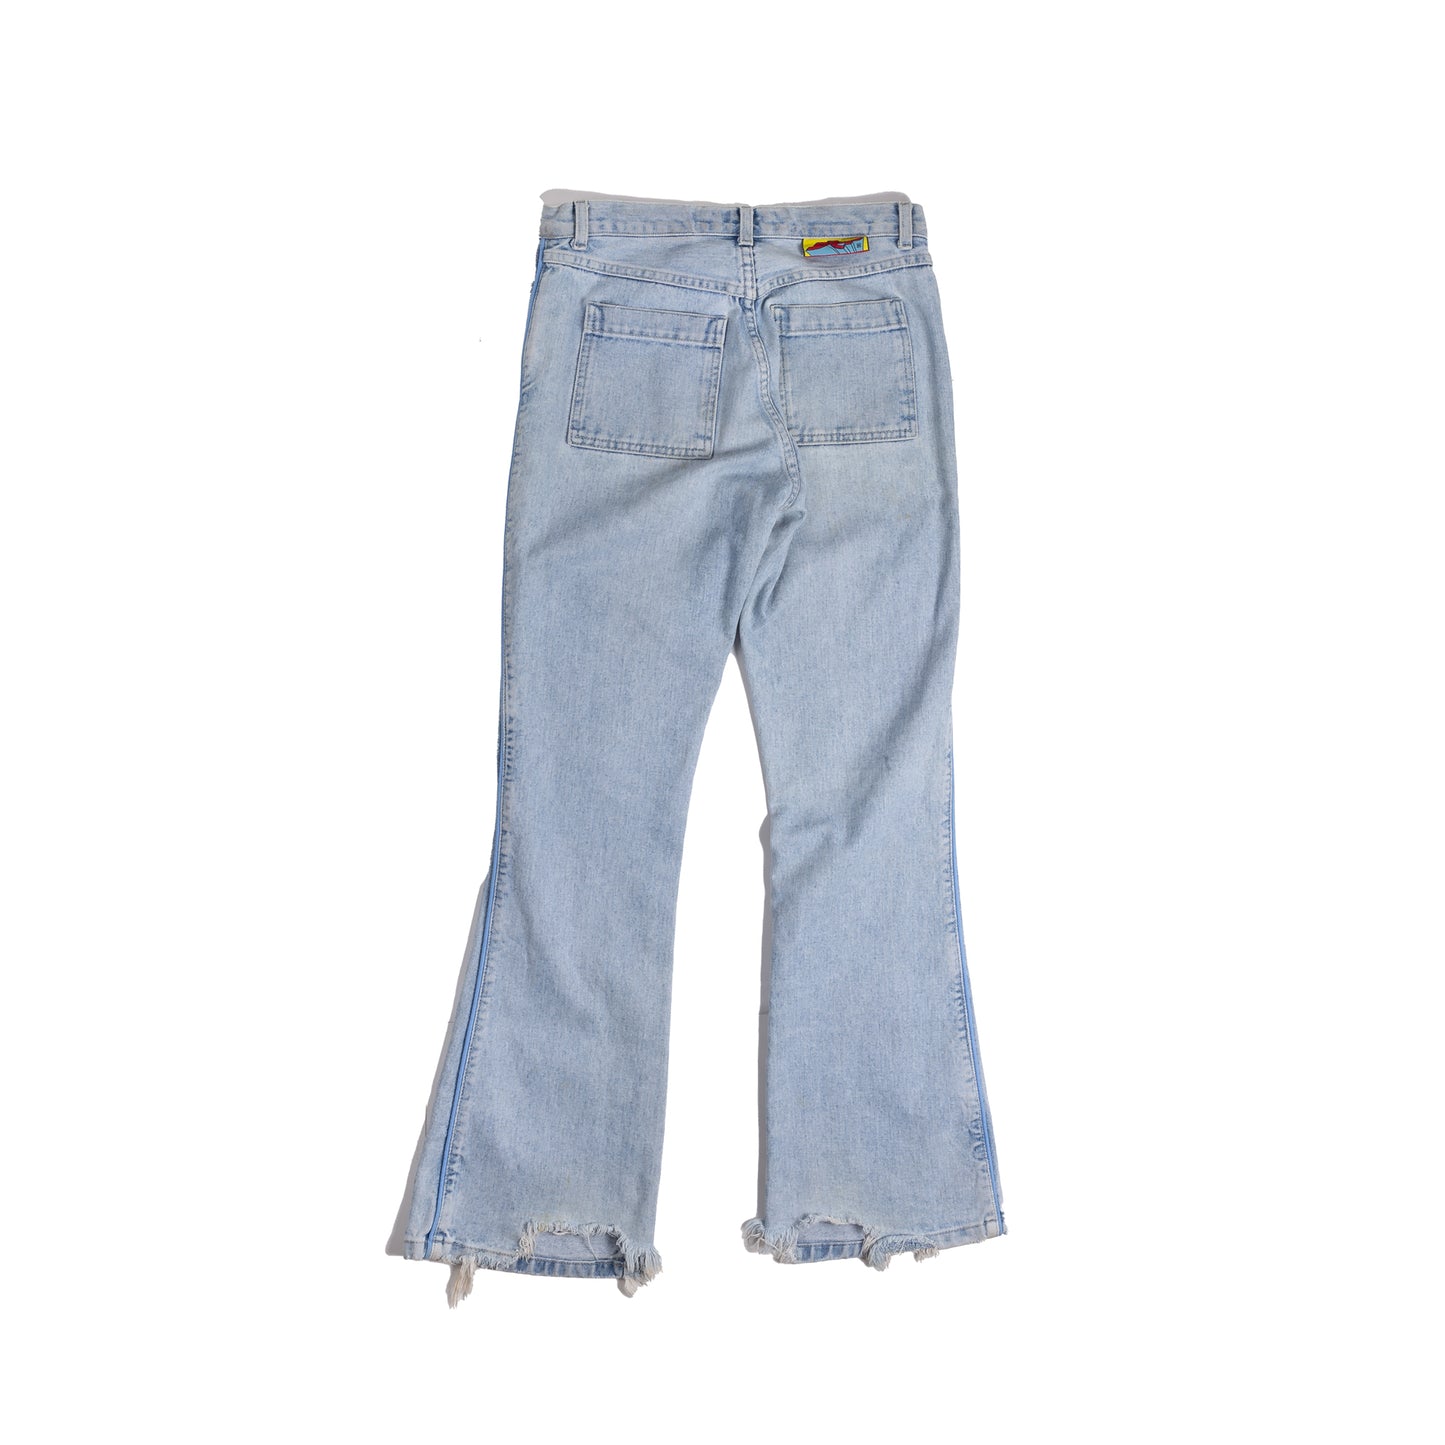 JNCO American Vintage Straight Flare Jeans